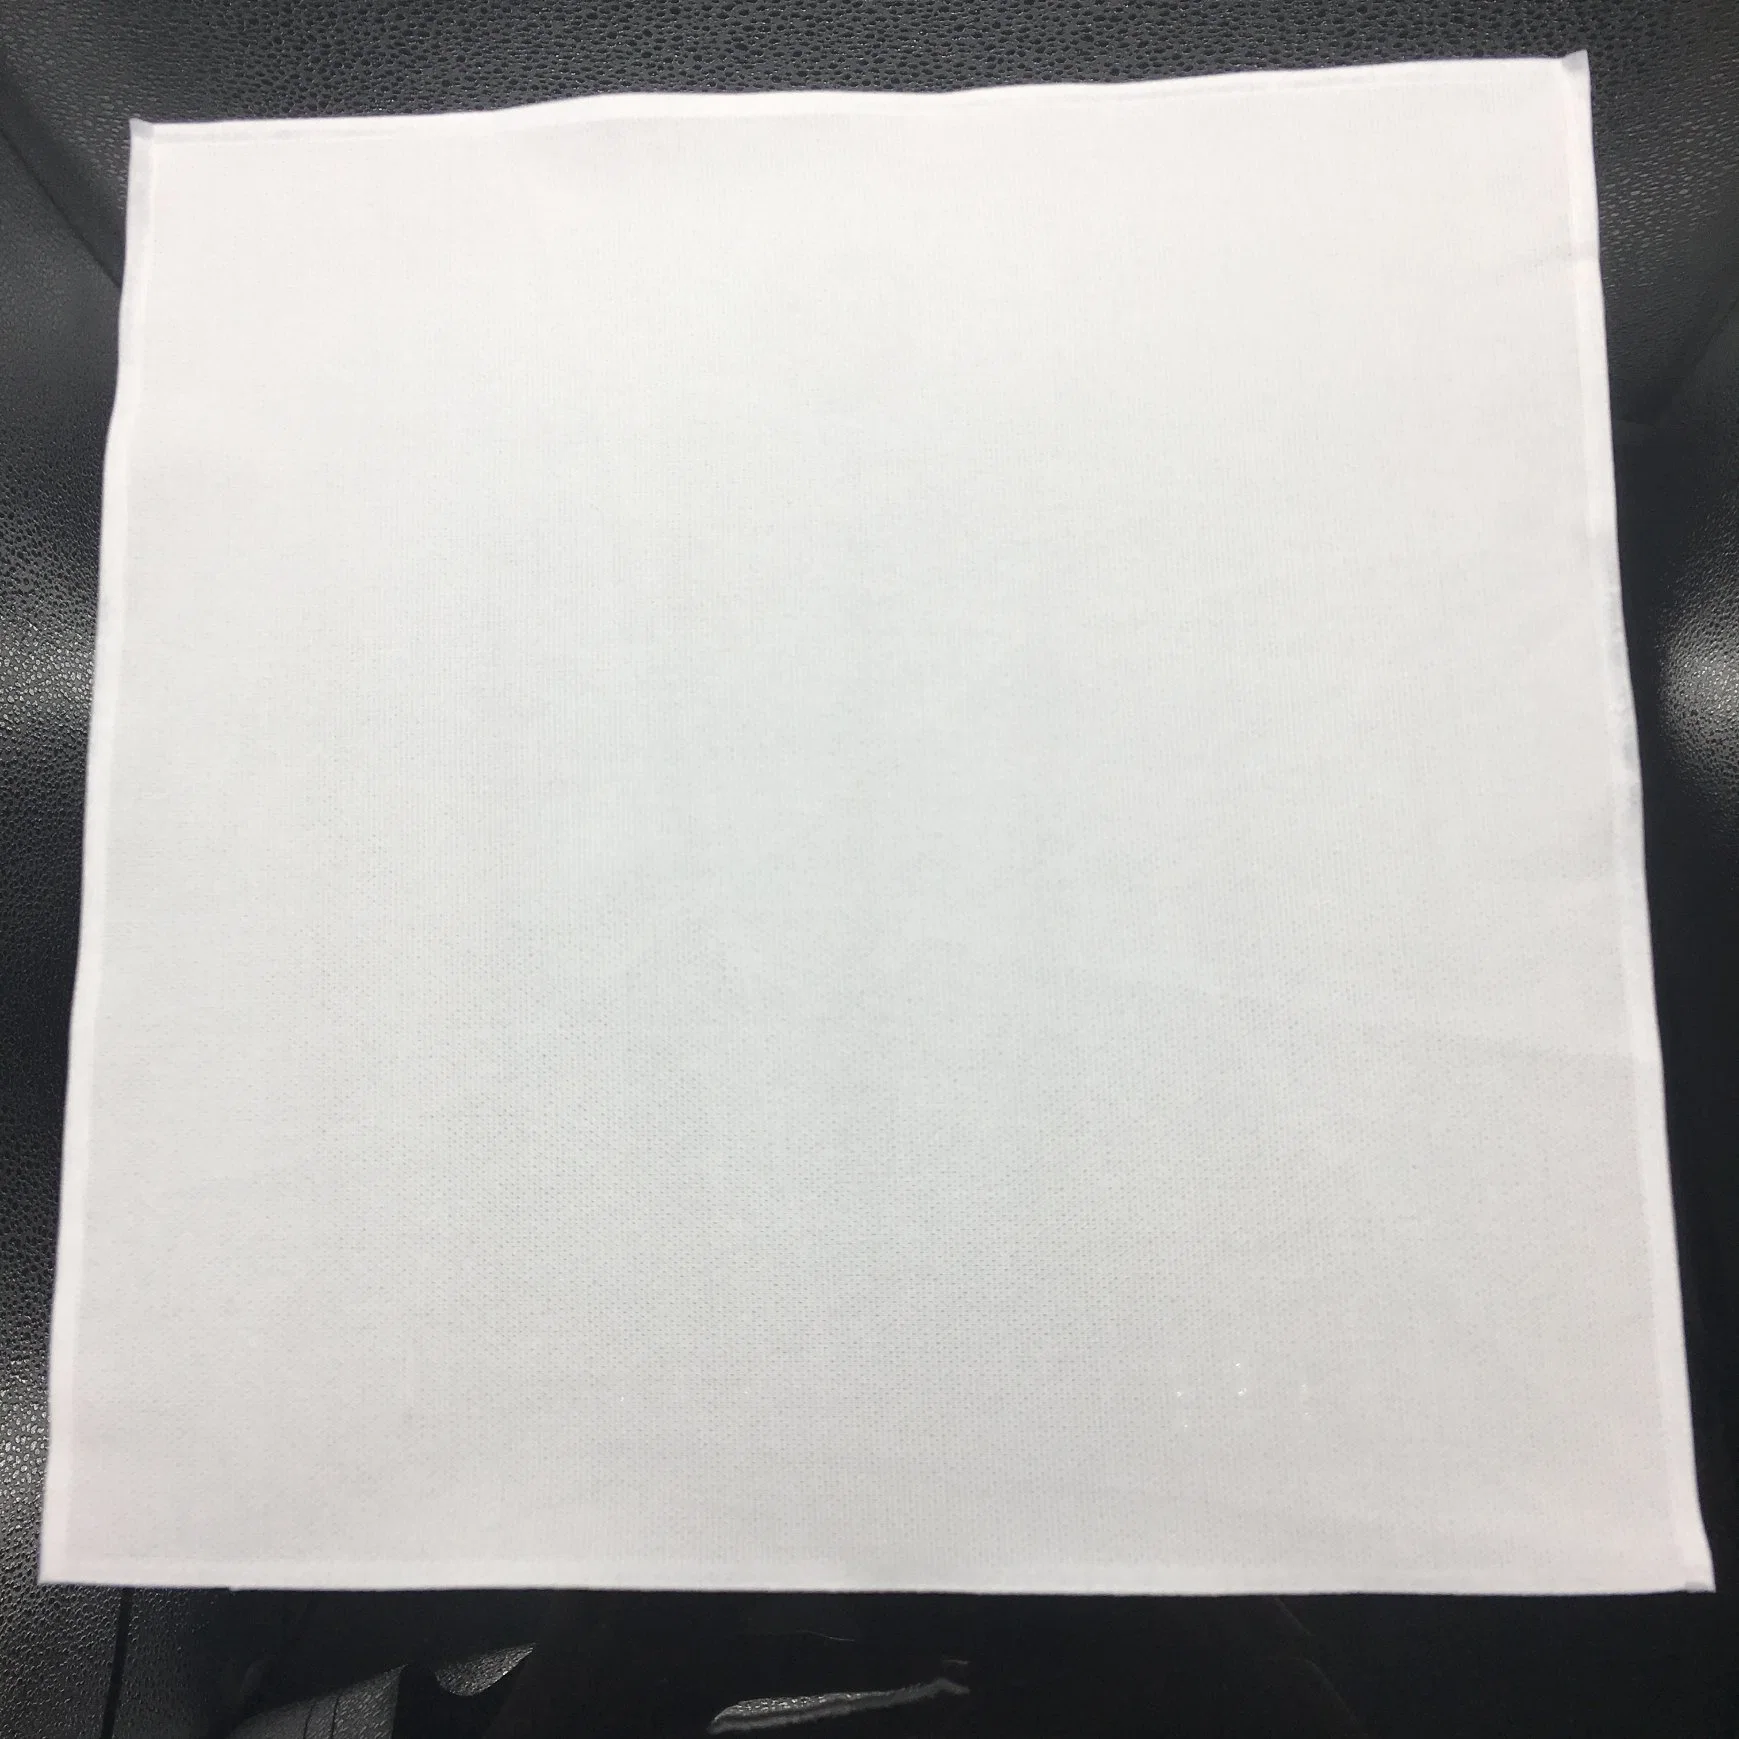 Ltk1020 9*9inch White Fold PCB LED Panel Cleanroom Wiper Cleaning Cloth Polyester